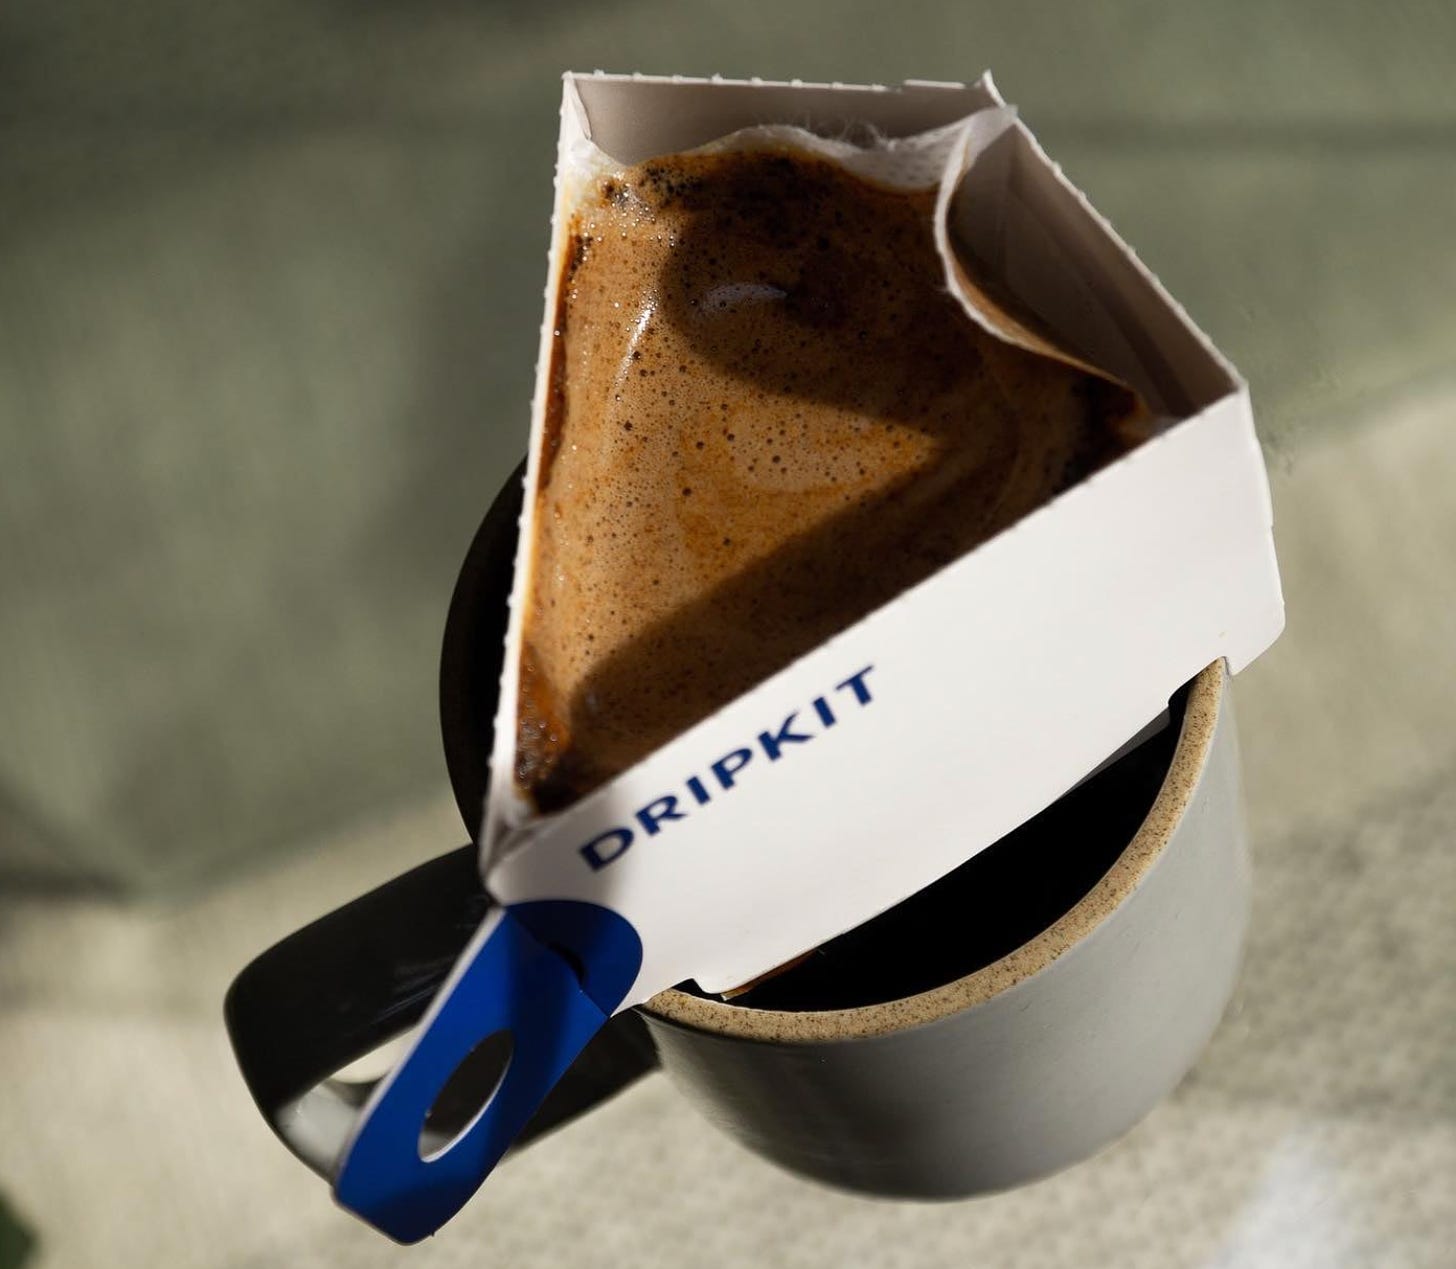 An overhead view of coffee brewing in a cardboard single-serving coffee brewer resting on a ceramic coffee mug.